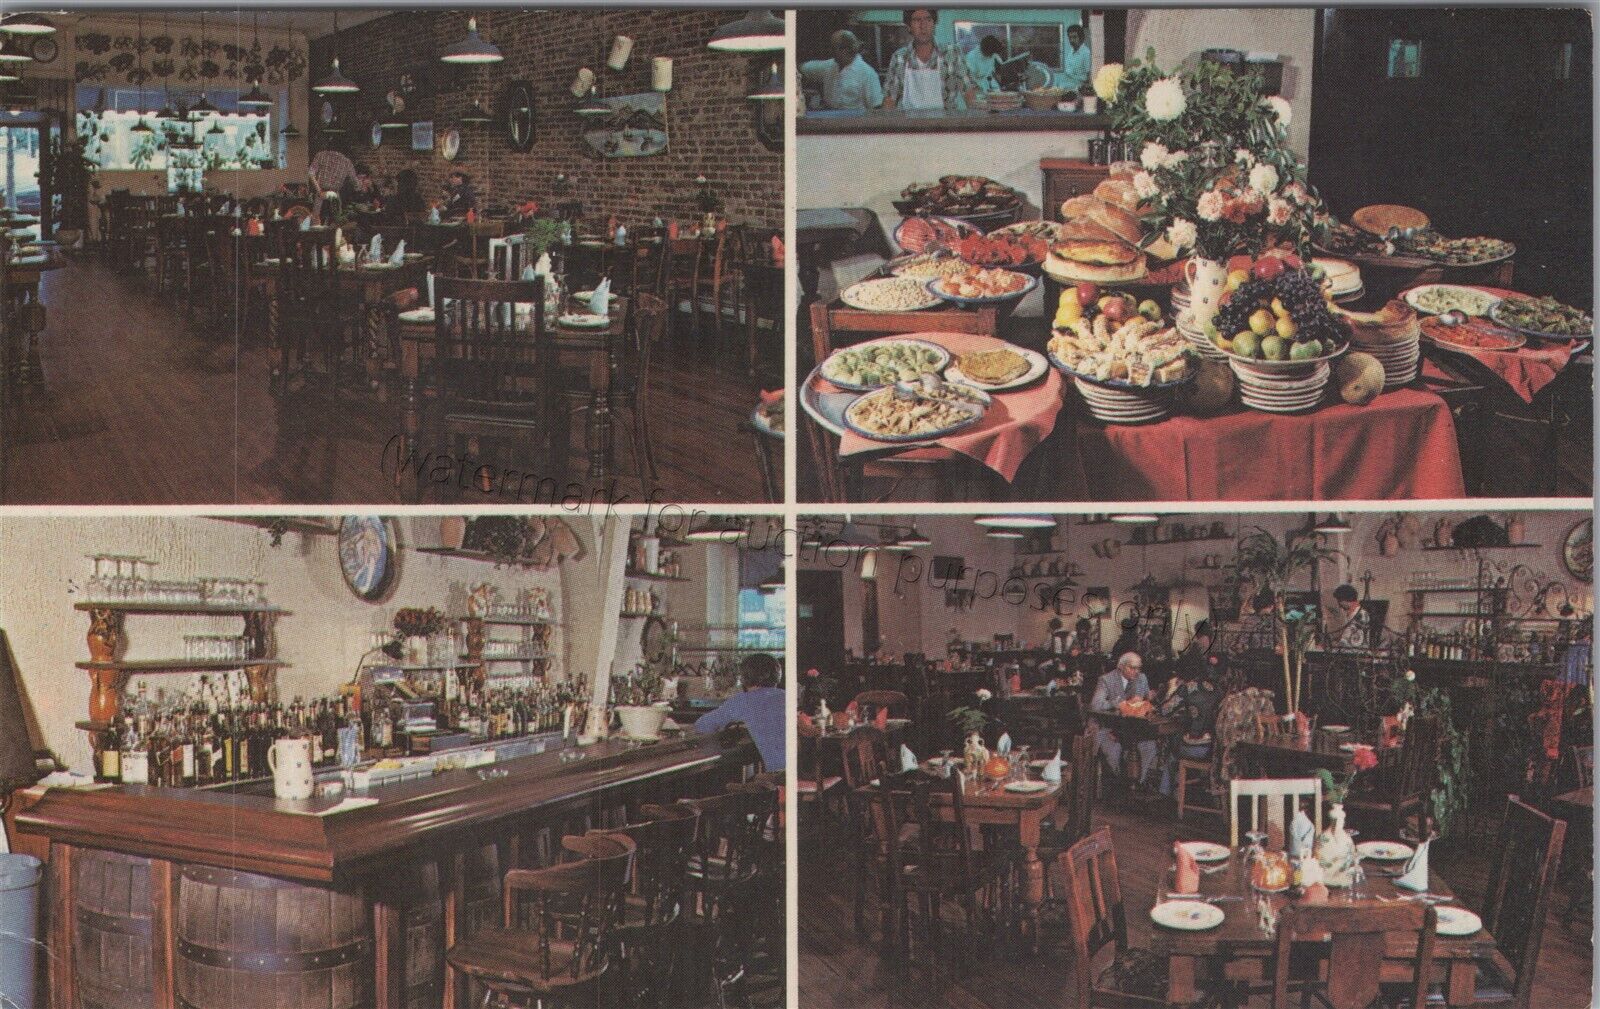 Flushing, Queens, NYC: Bacigalup\'s - Vintage New York City Restaurant Postcard